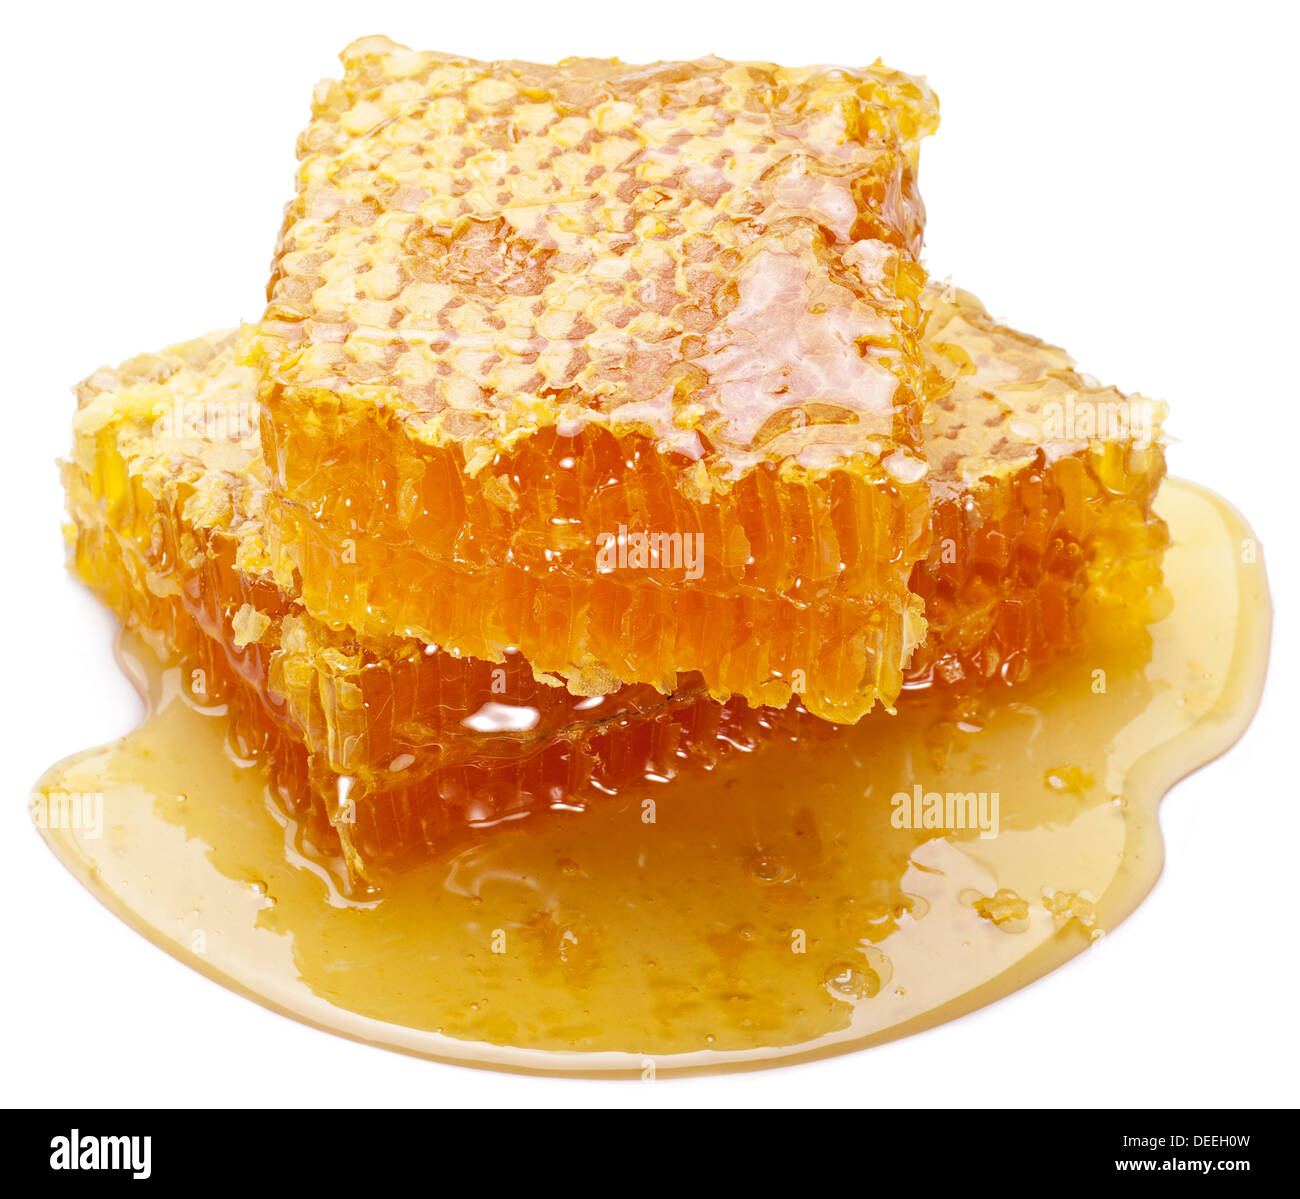 Honeycomb on a white background. Stock Photo